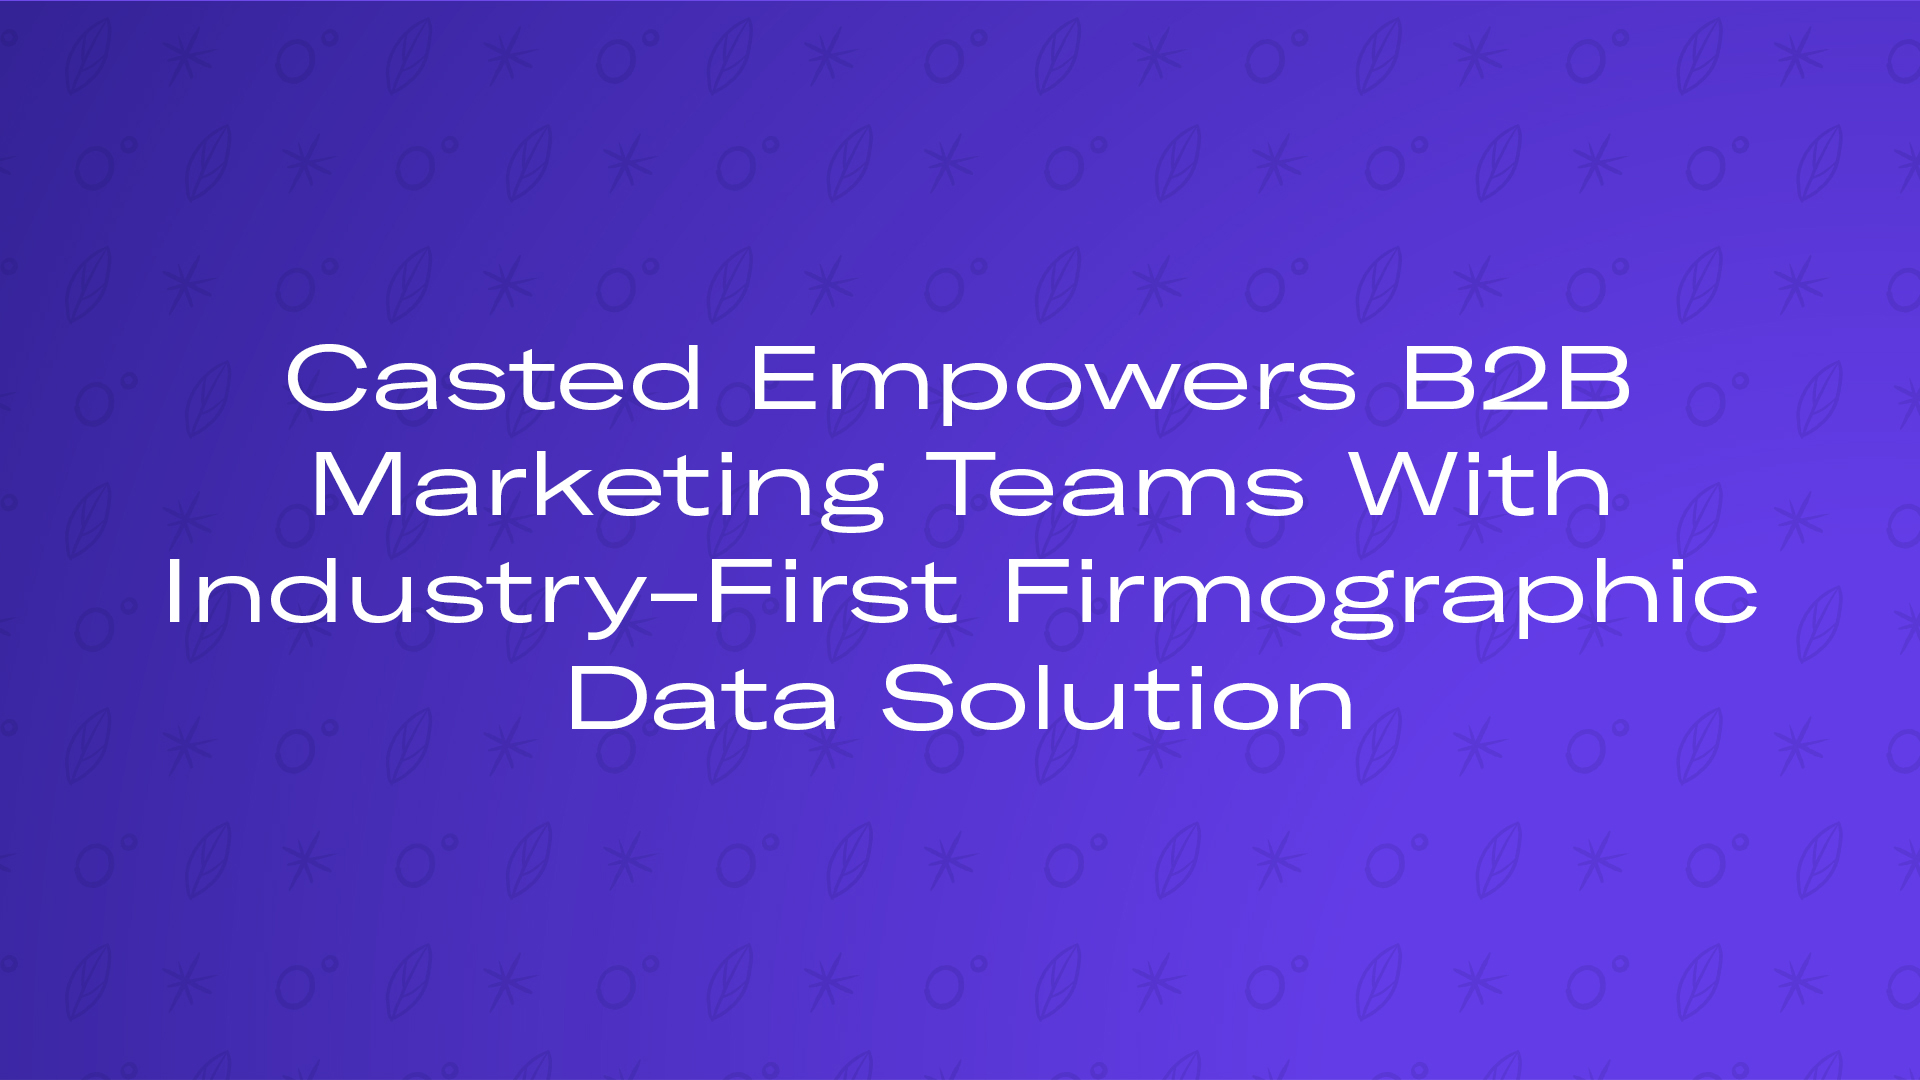 Casted Empowers B2B Marketing Teams With Industry-First Firmographic Data Solution